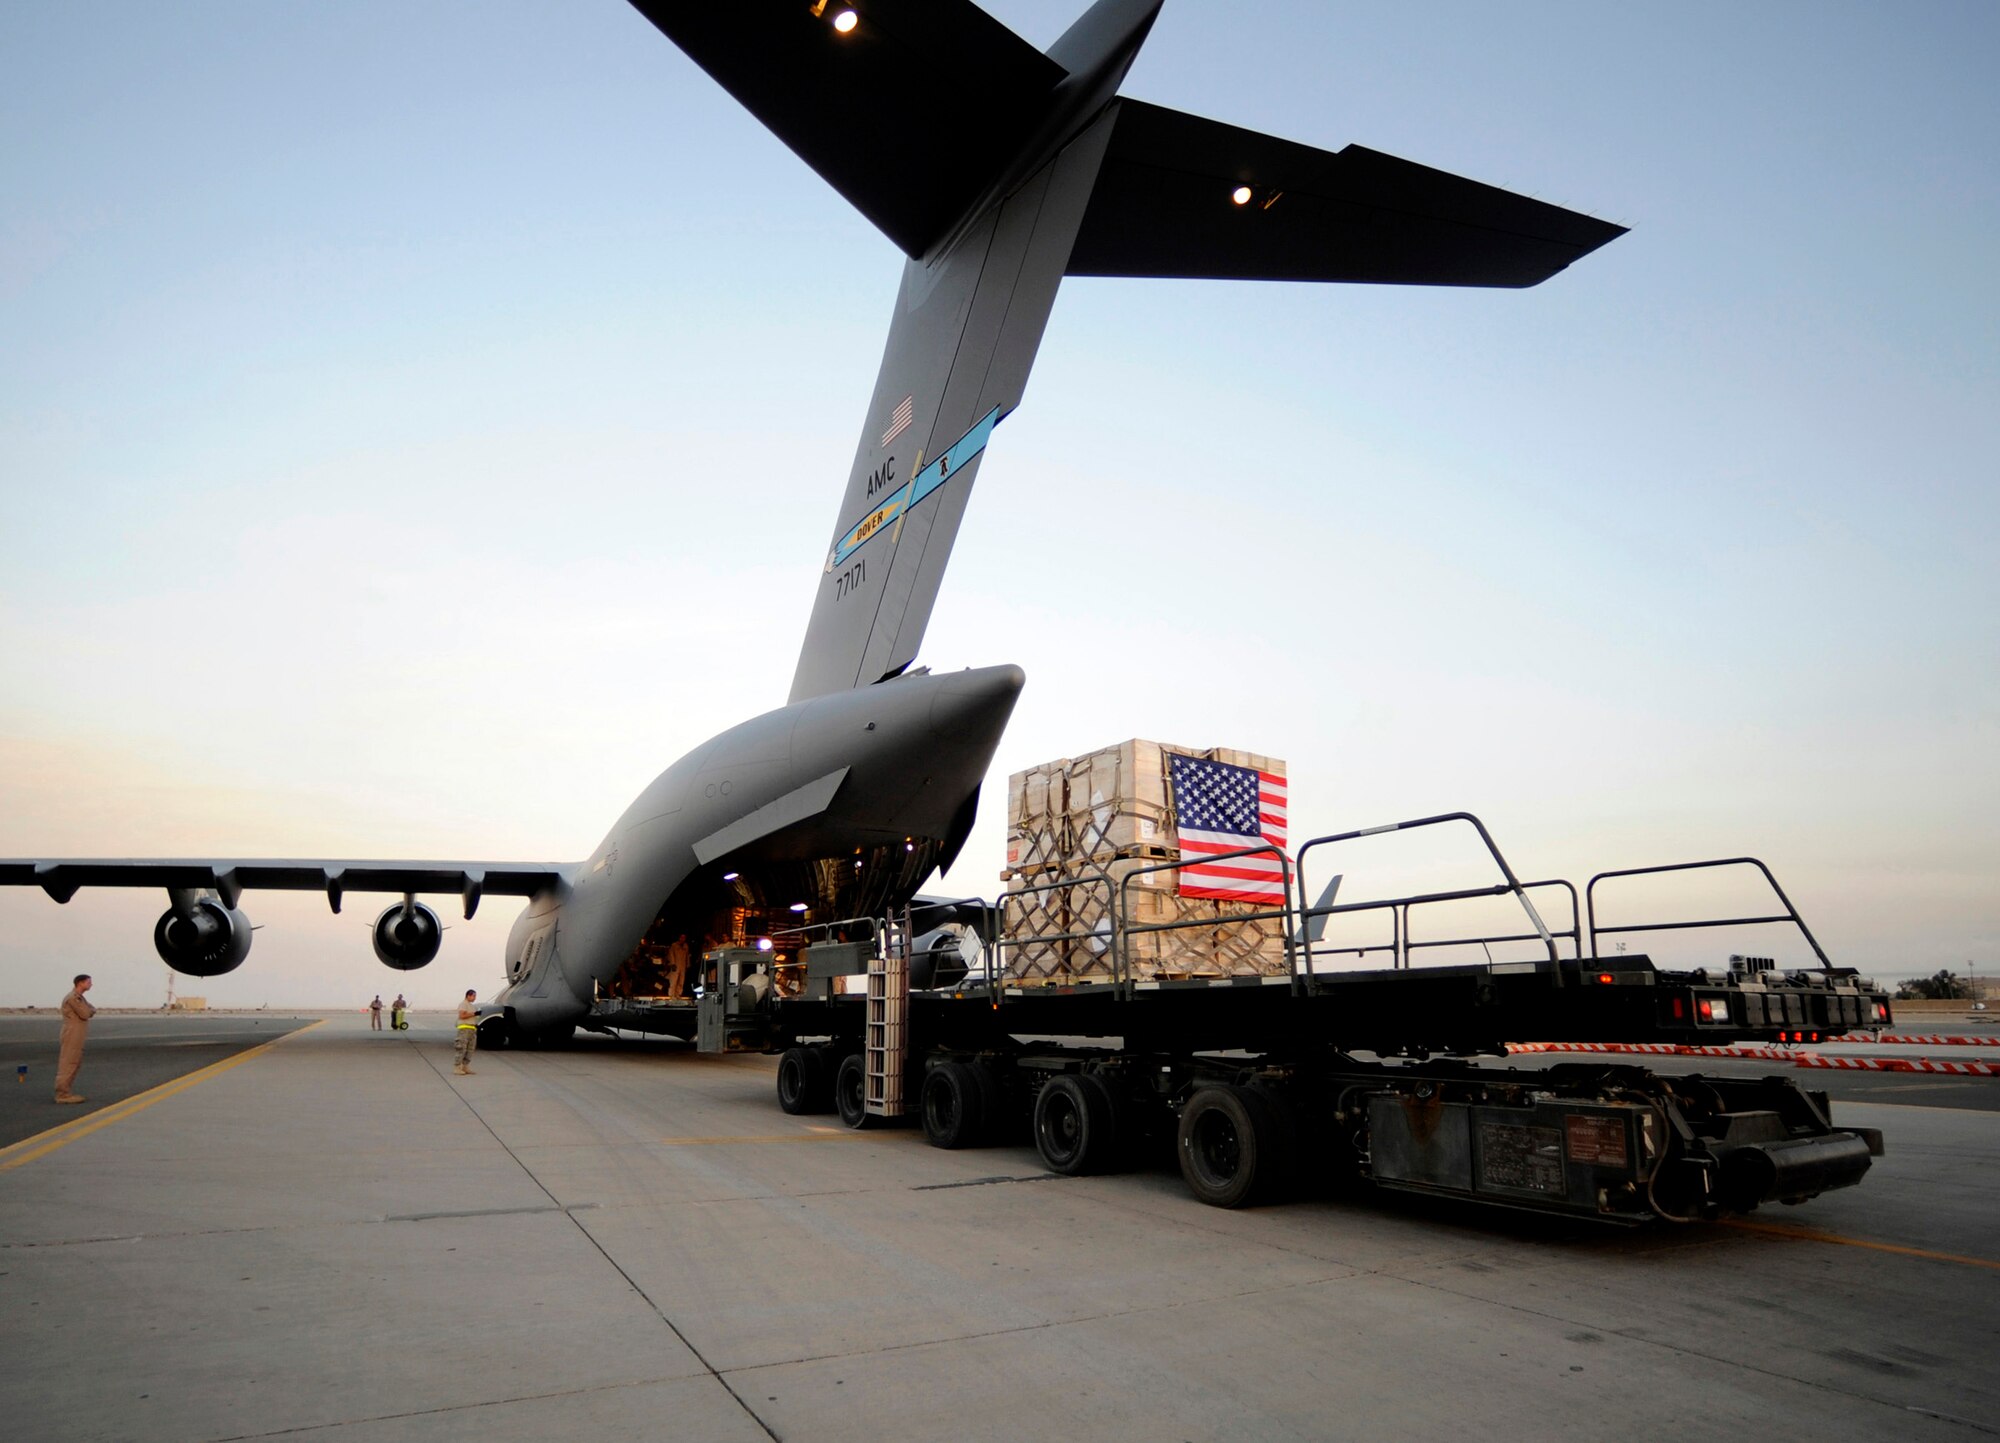 A pallet containing humanitarian relief supplies destined for Pakistan is prepared to be loaded into the cargo bay of a C-17 Globemaster III May 20 at an air base in Southwest Asia. (U.S. Air Force photo/Staff Sgt. Shawn Weismiller)